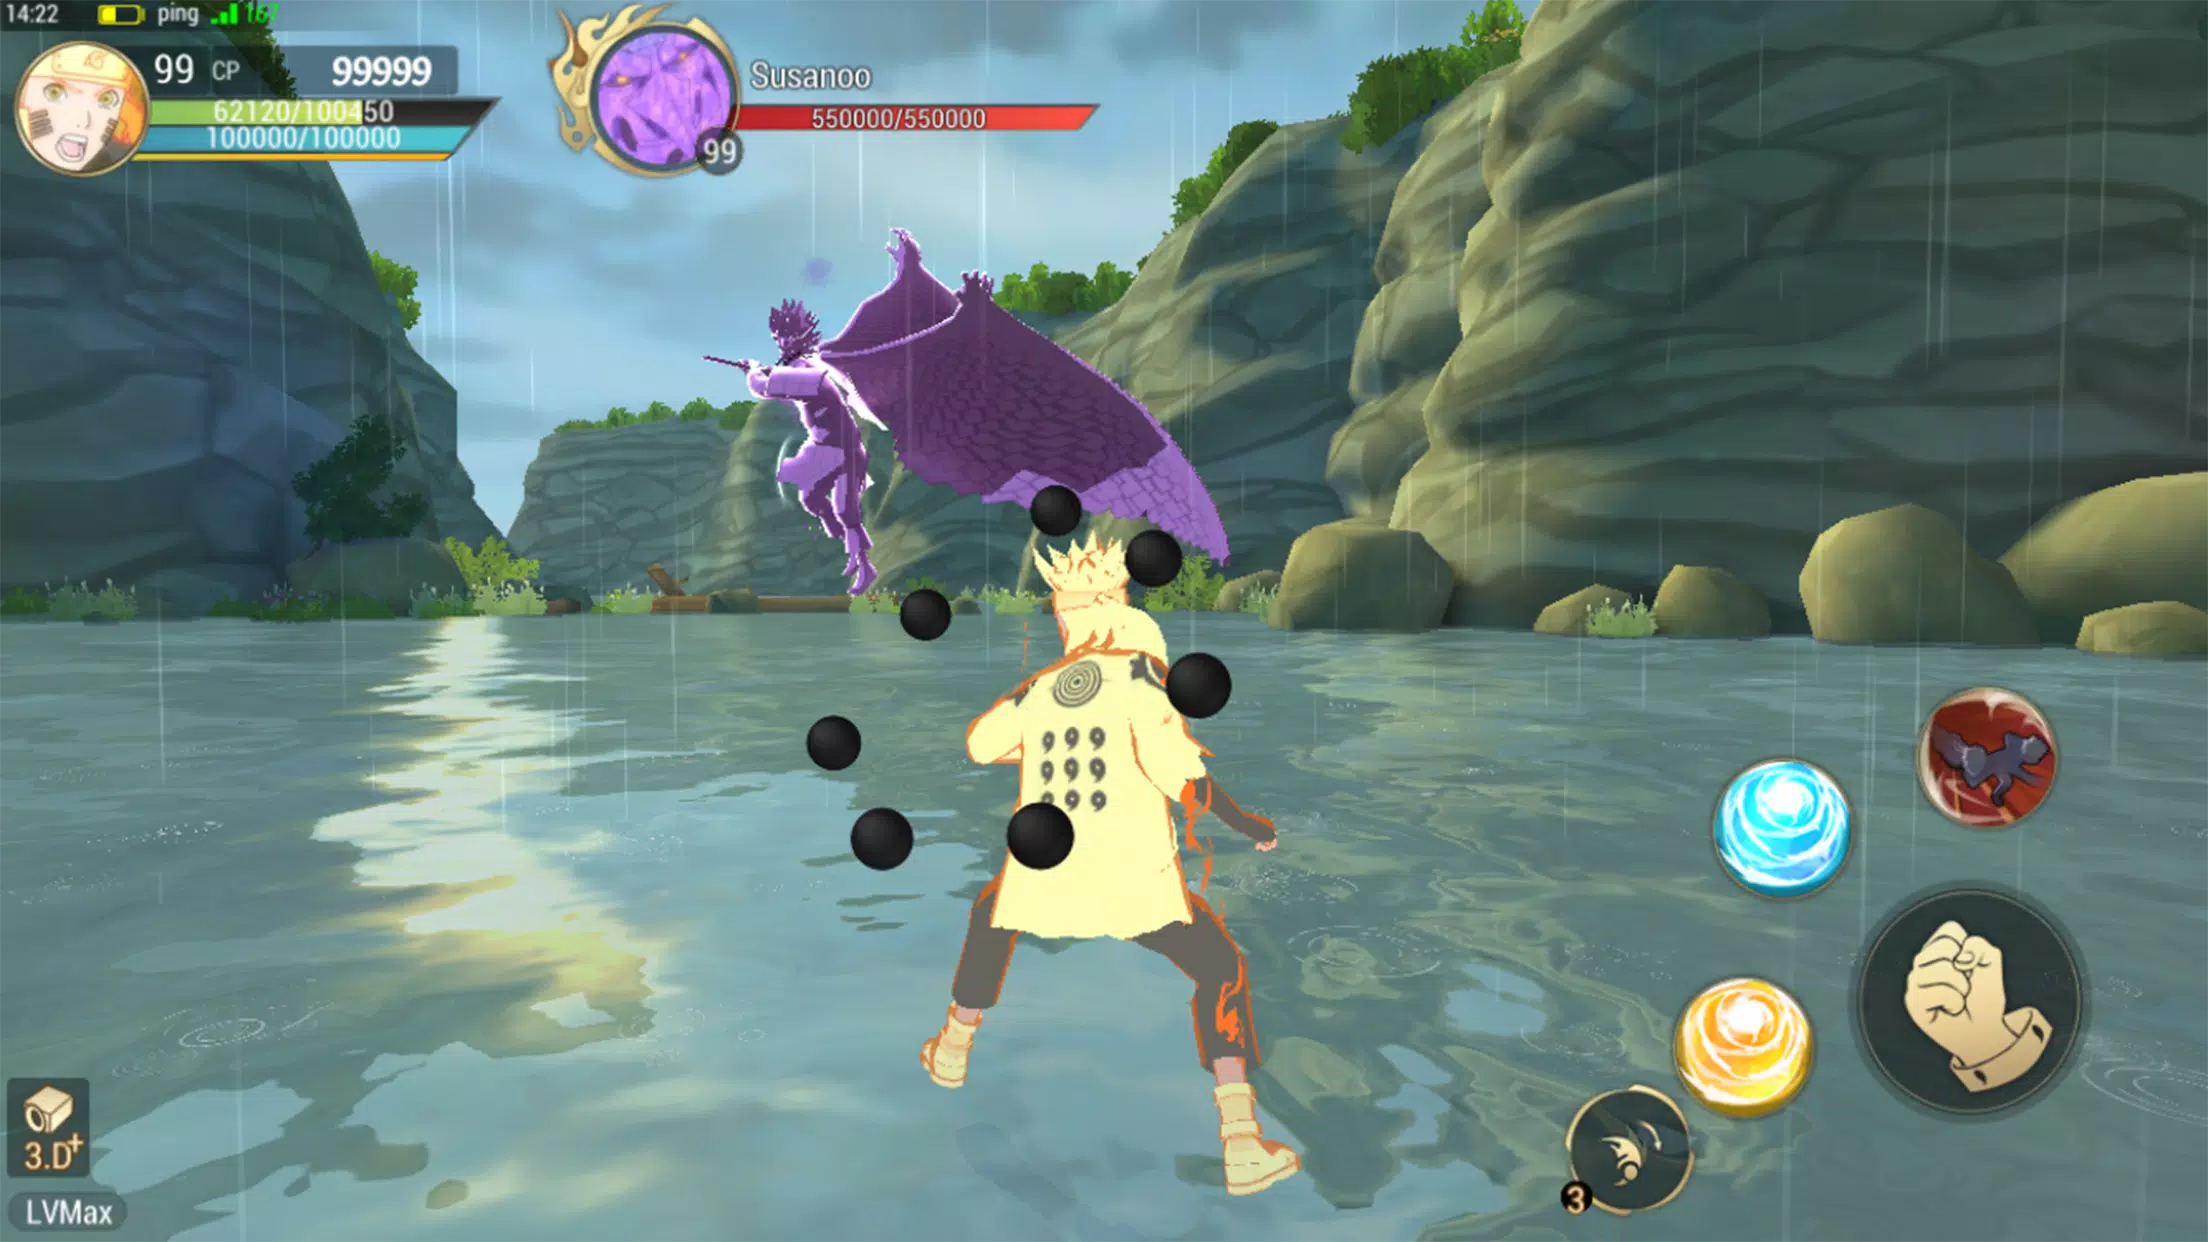 Naruto Mobile APK Latest Version Download For Free